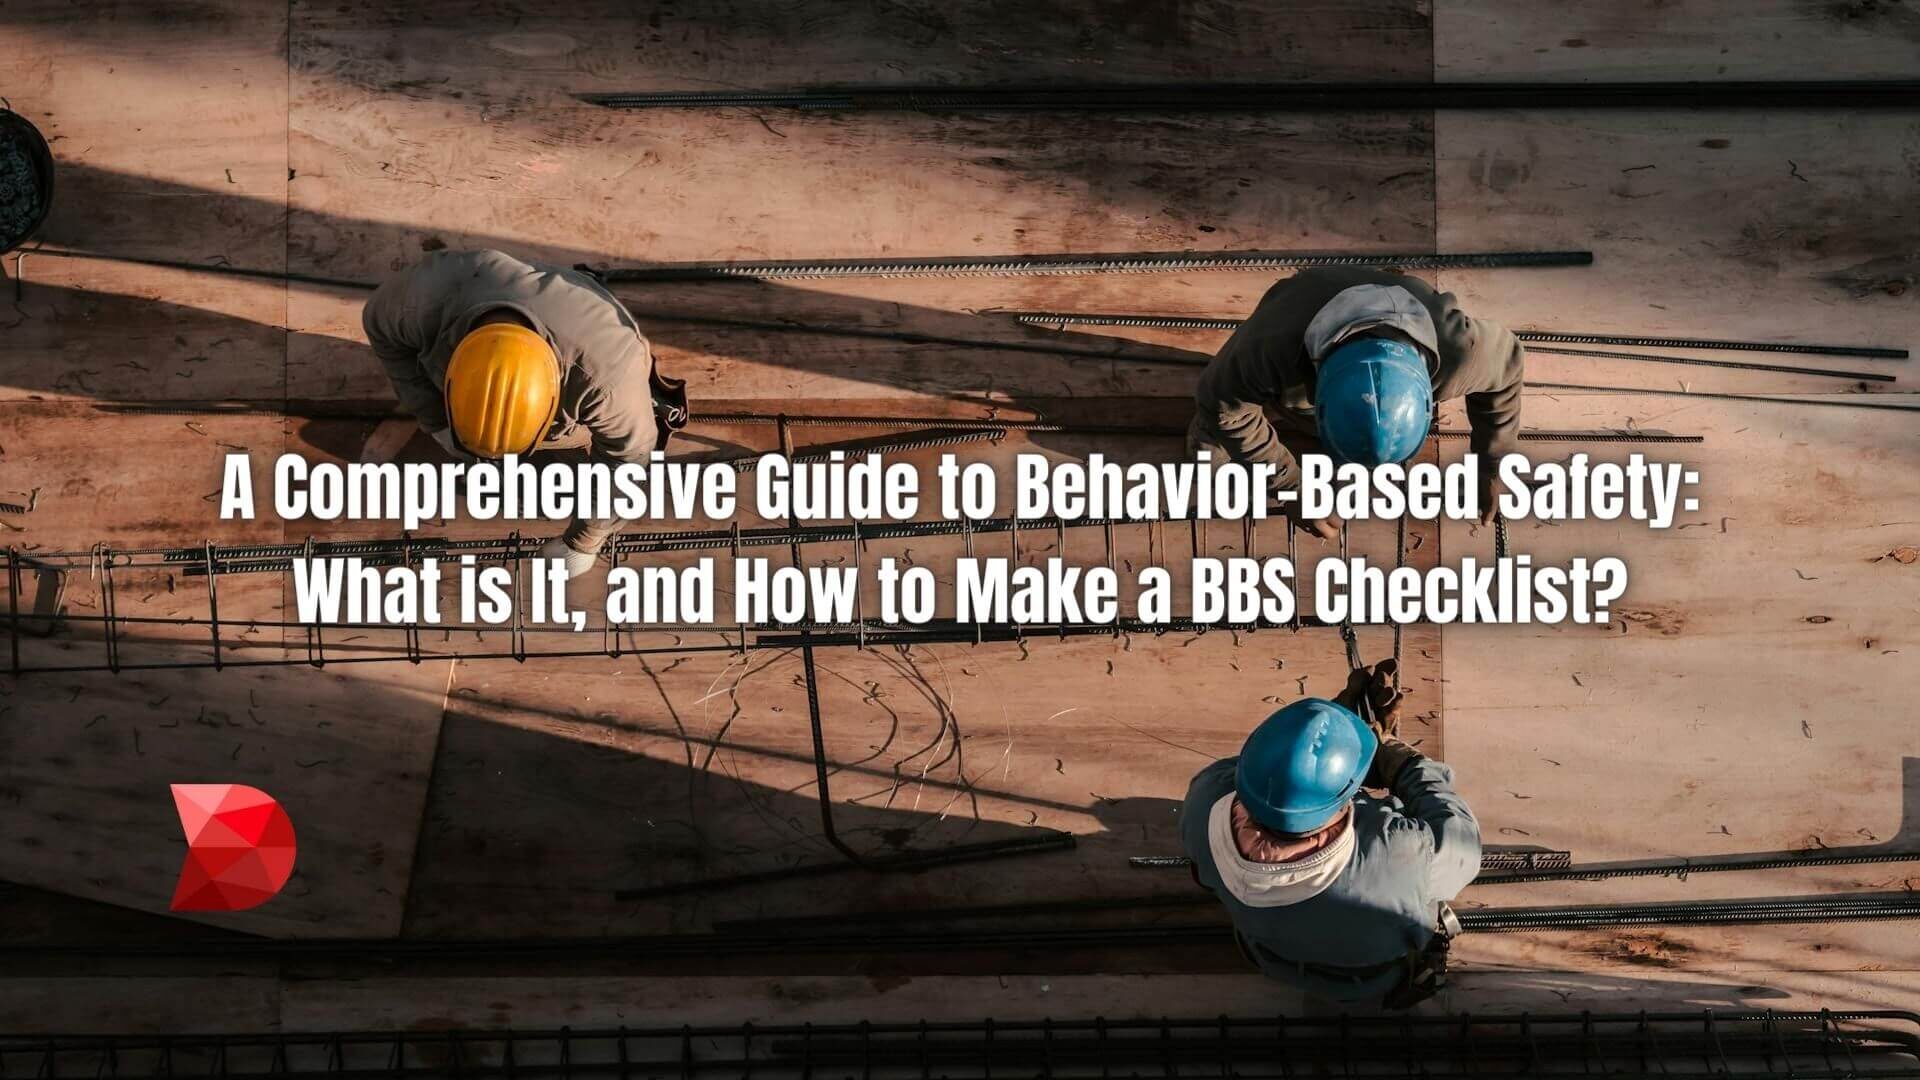 Navigate the world of BBS with confidence! Learn what it is and how to create a Behavior-Based Safety Checklist for optimal safety outcomes.